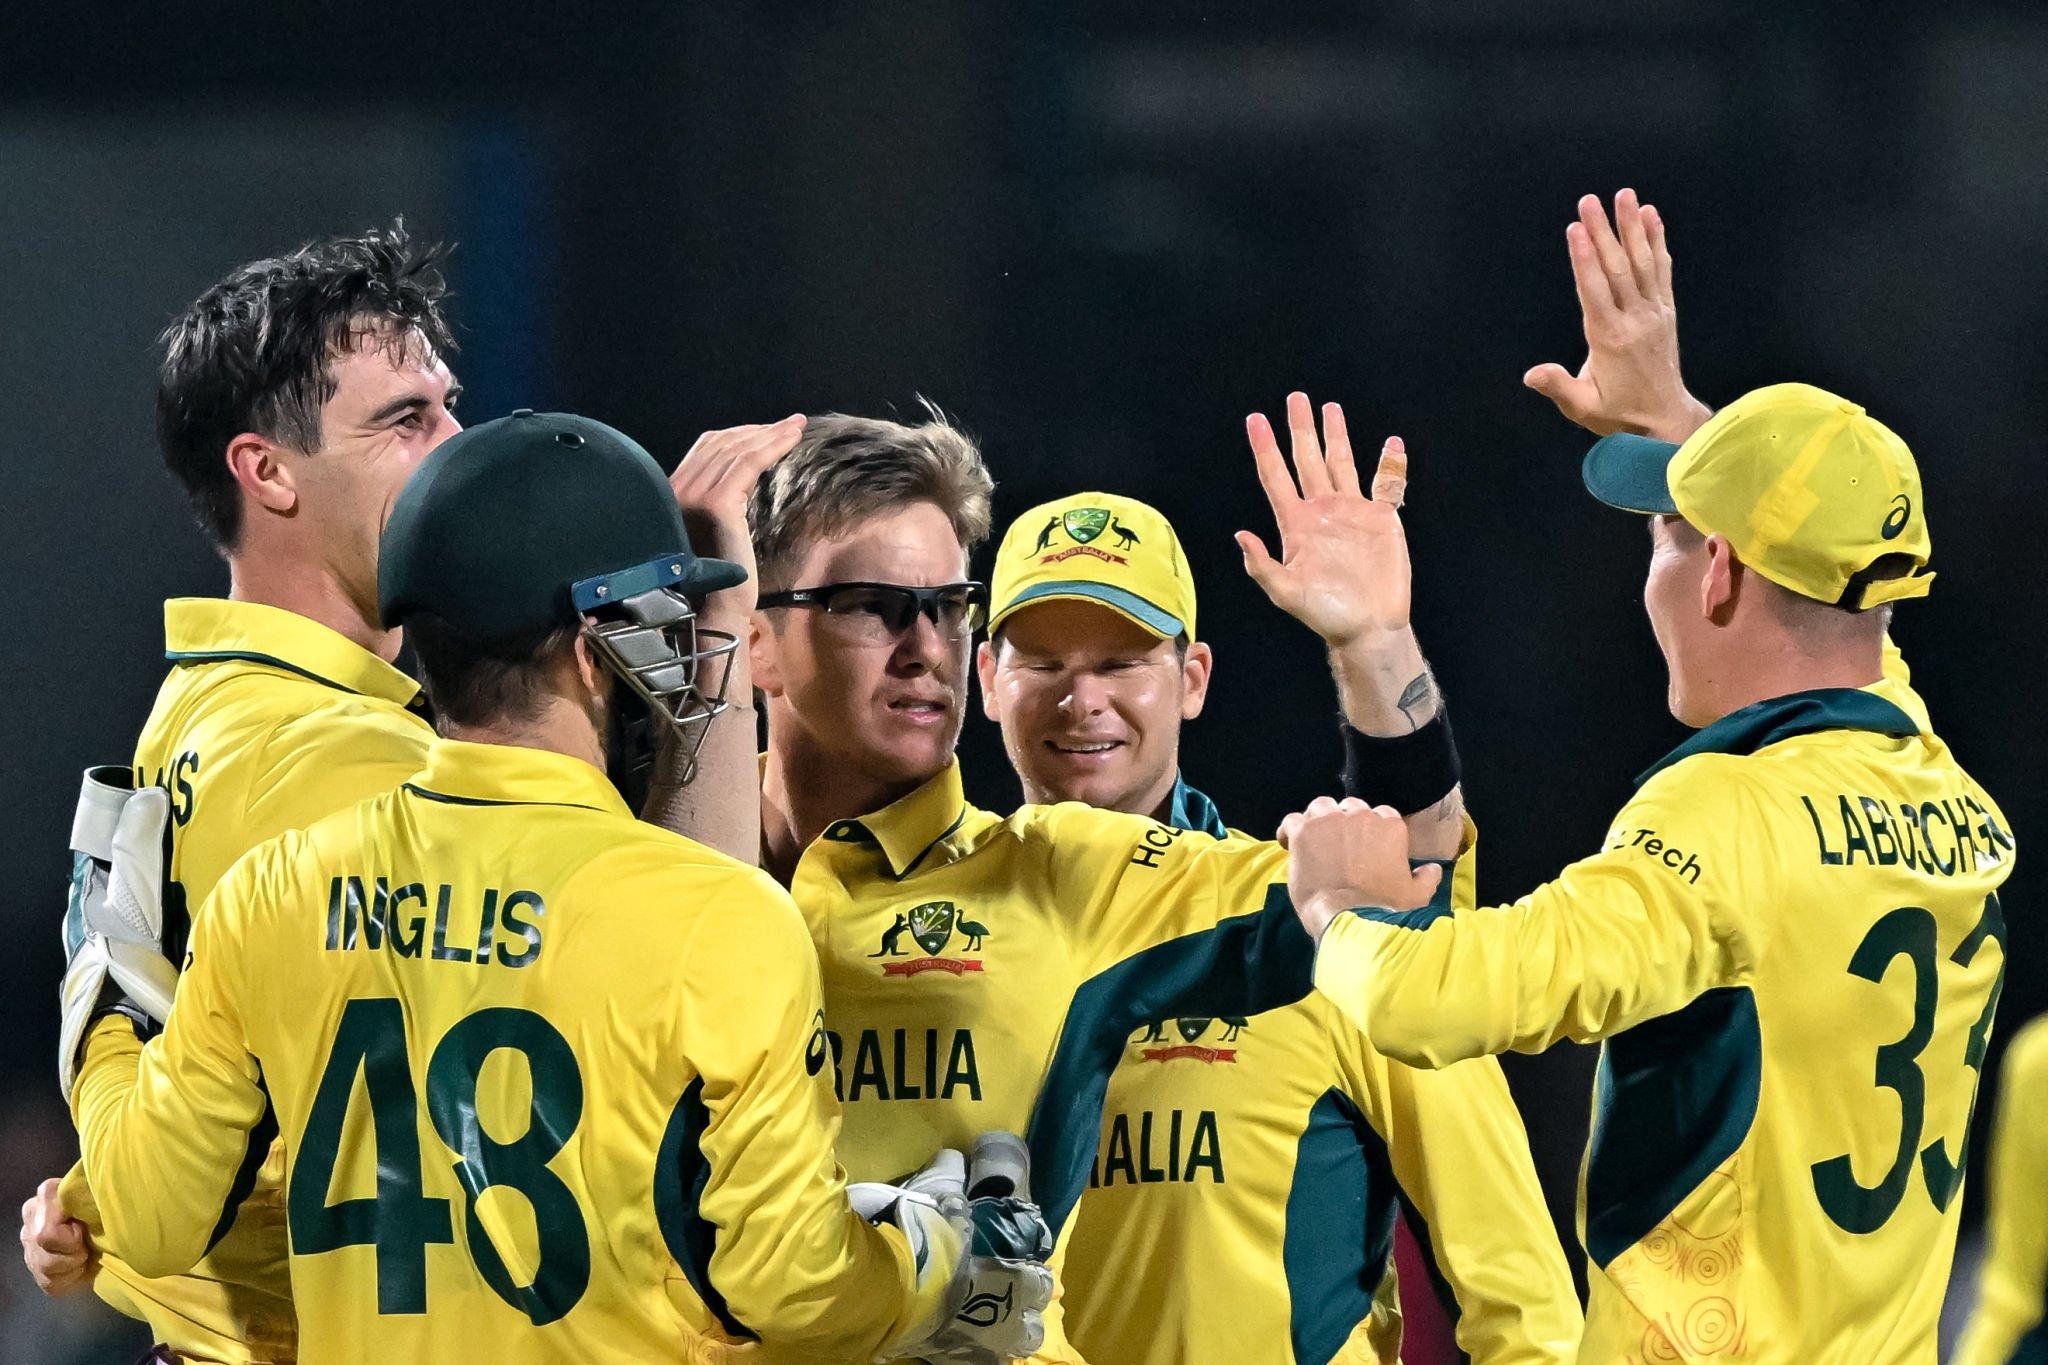 Australia defeated Pakistan by 62 runs in the match.